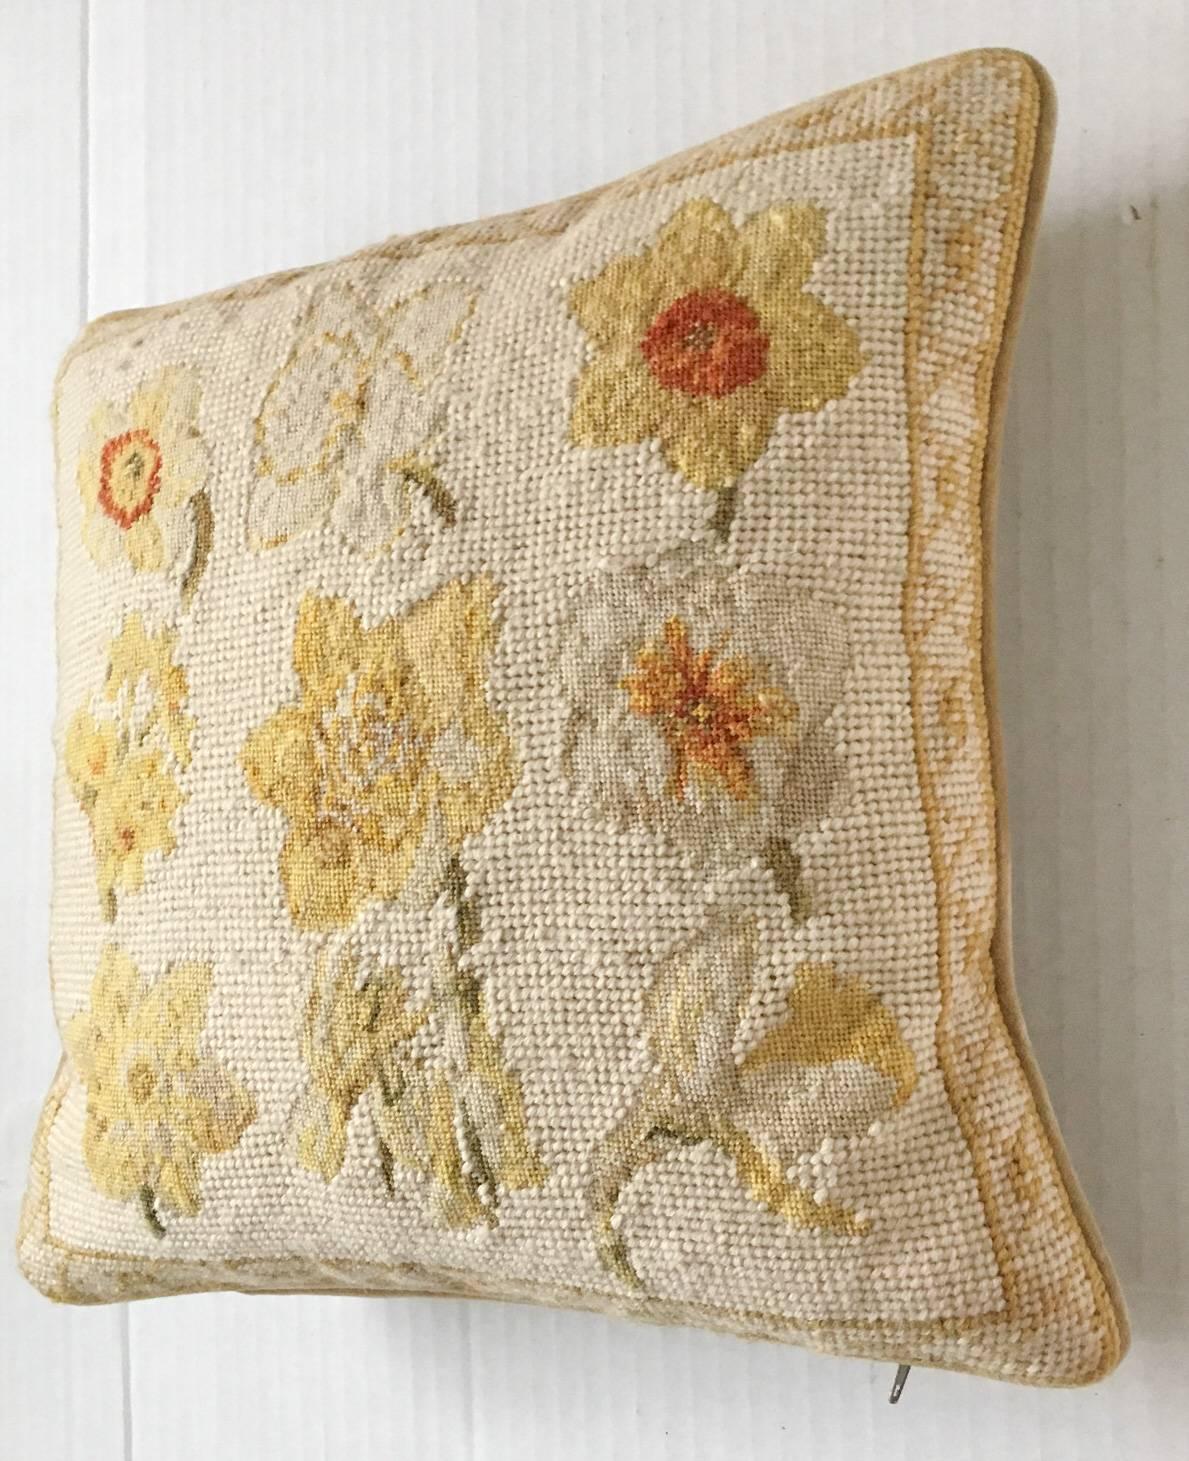 Beautiful handmade wool needlepoint pillow by the esteemed Chelsea Textiles, featuring flowers of daffodils and jonquil blossoms. Velvet back with down insert, zipper closure.